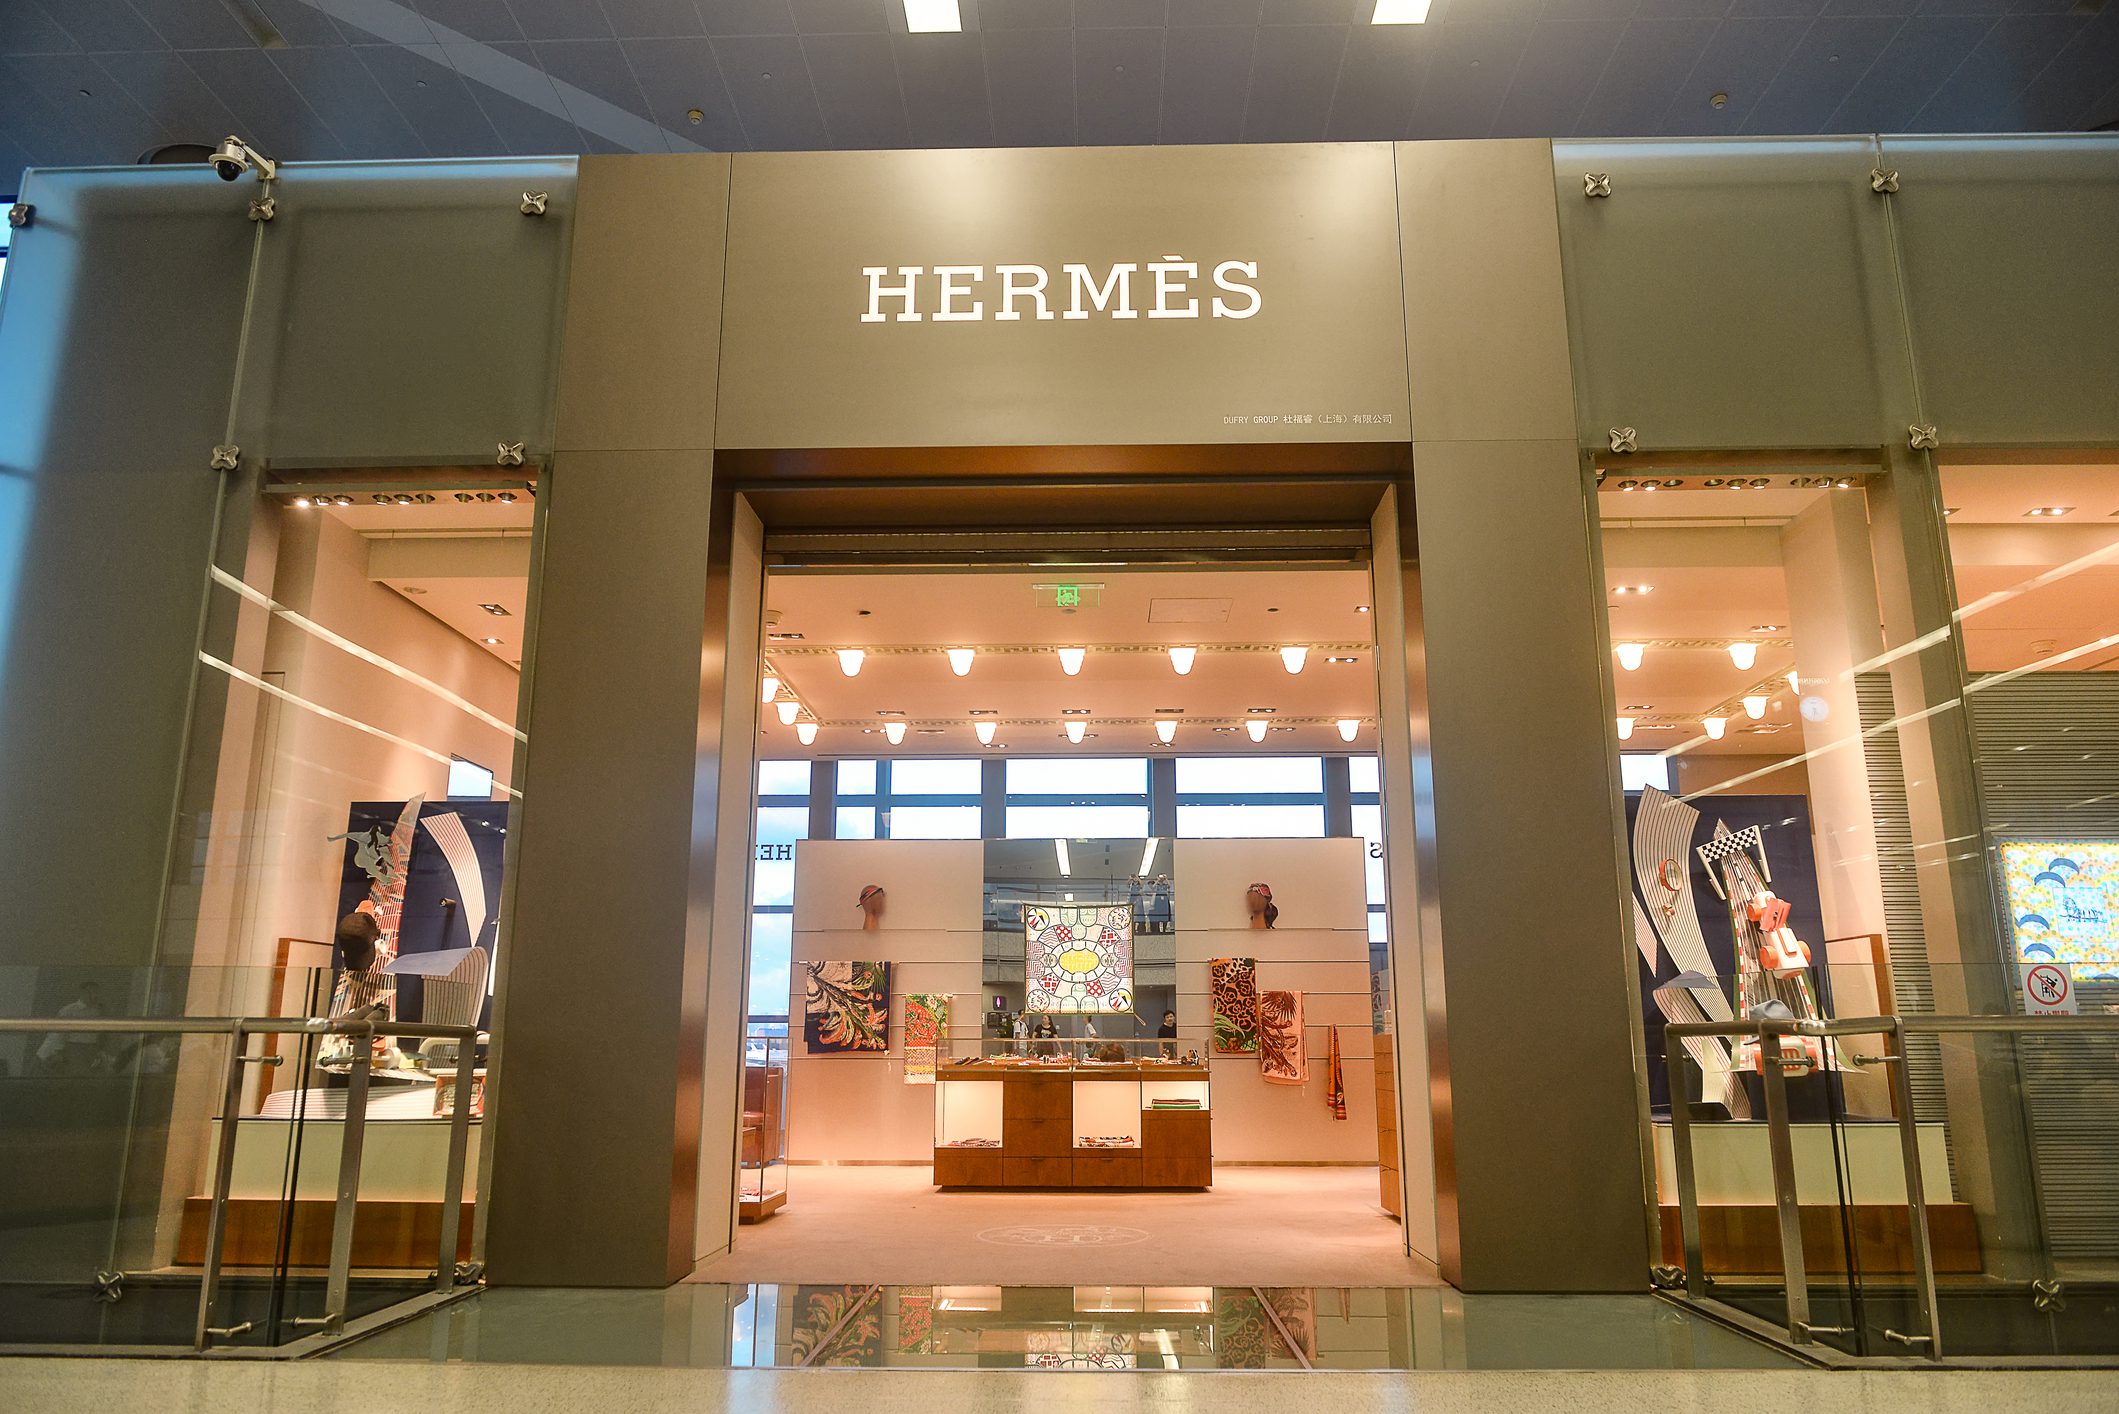 Handmade Hermes is from H factory. If you are interested, please